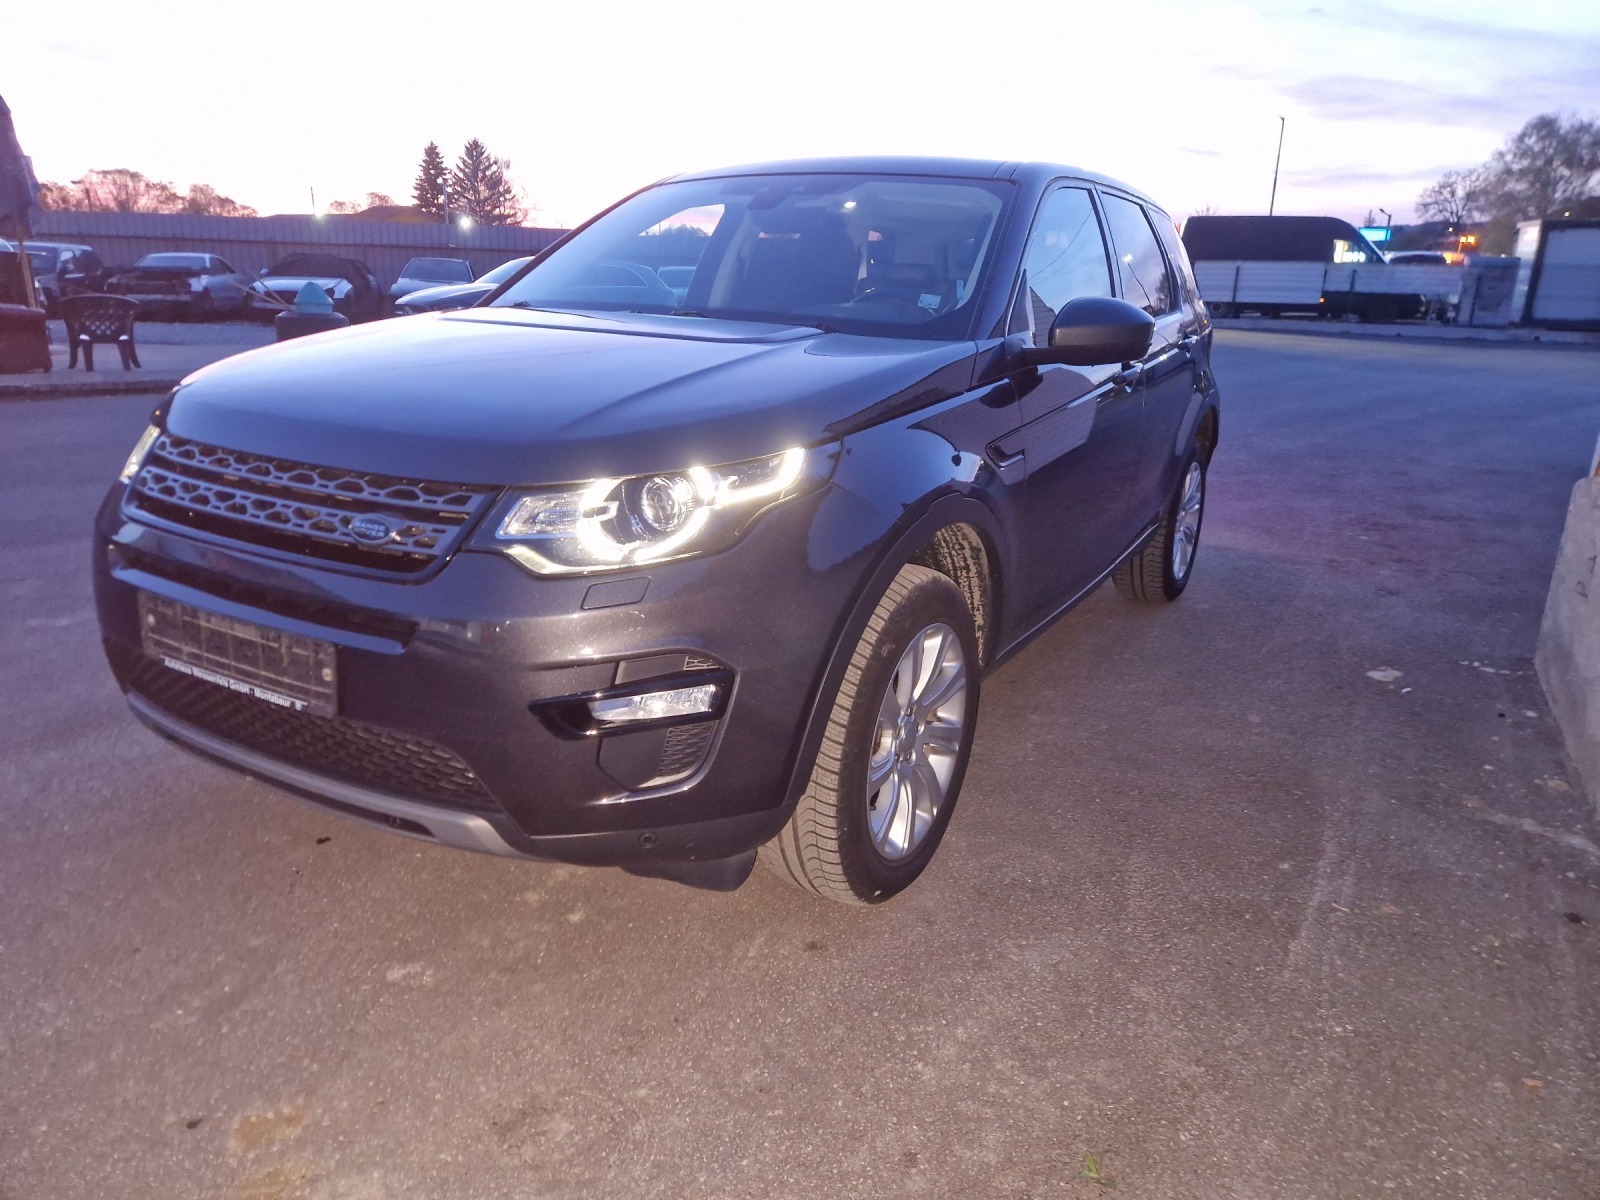 Land Rover Discovery Range Rover Discovery 2.0 180кс 204дтд на части - изображение 1